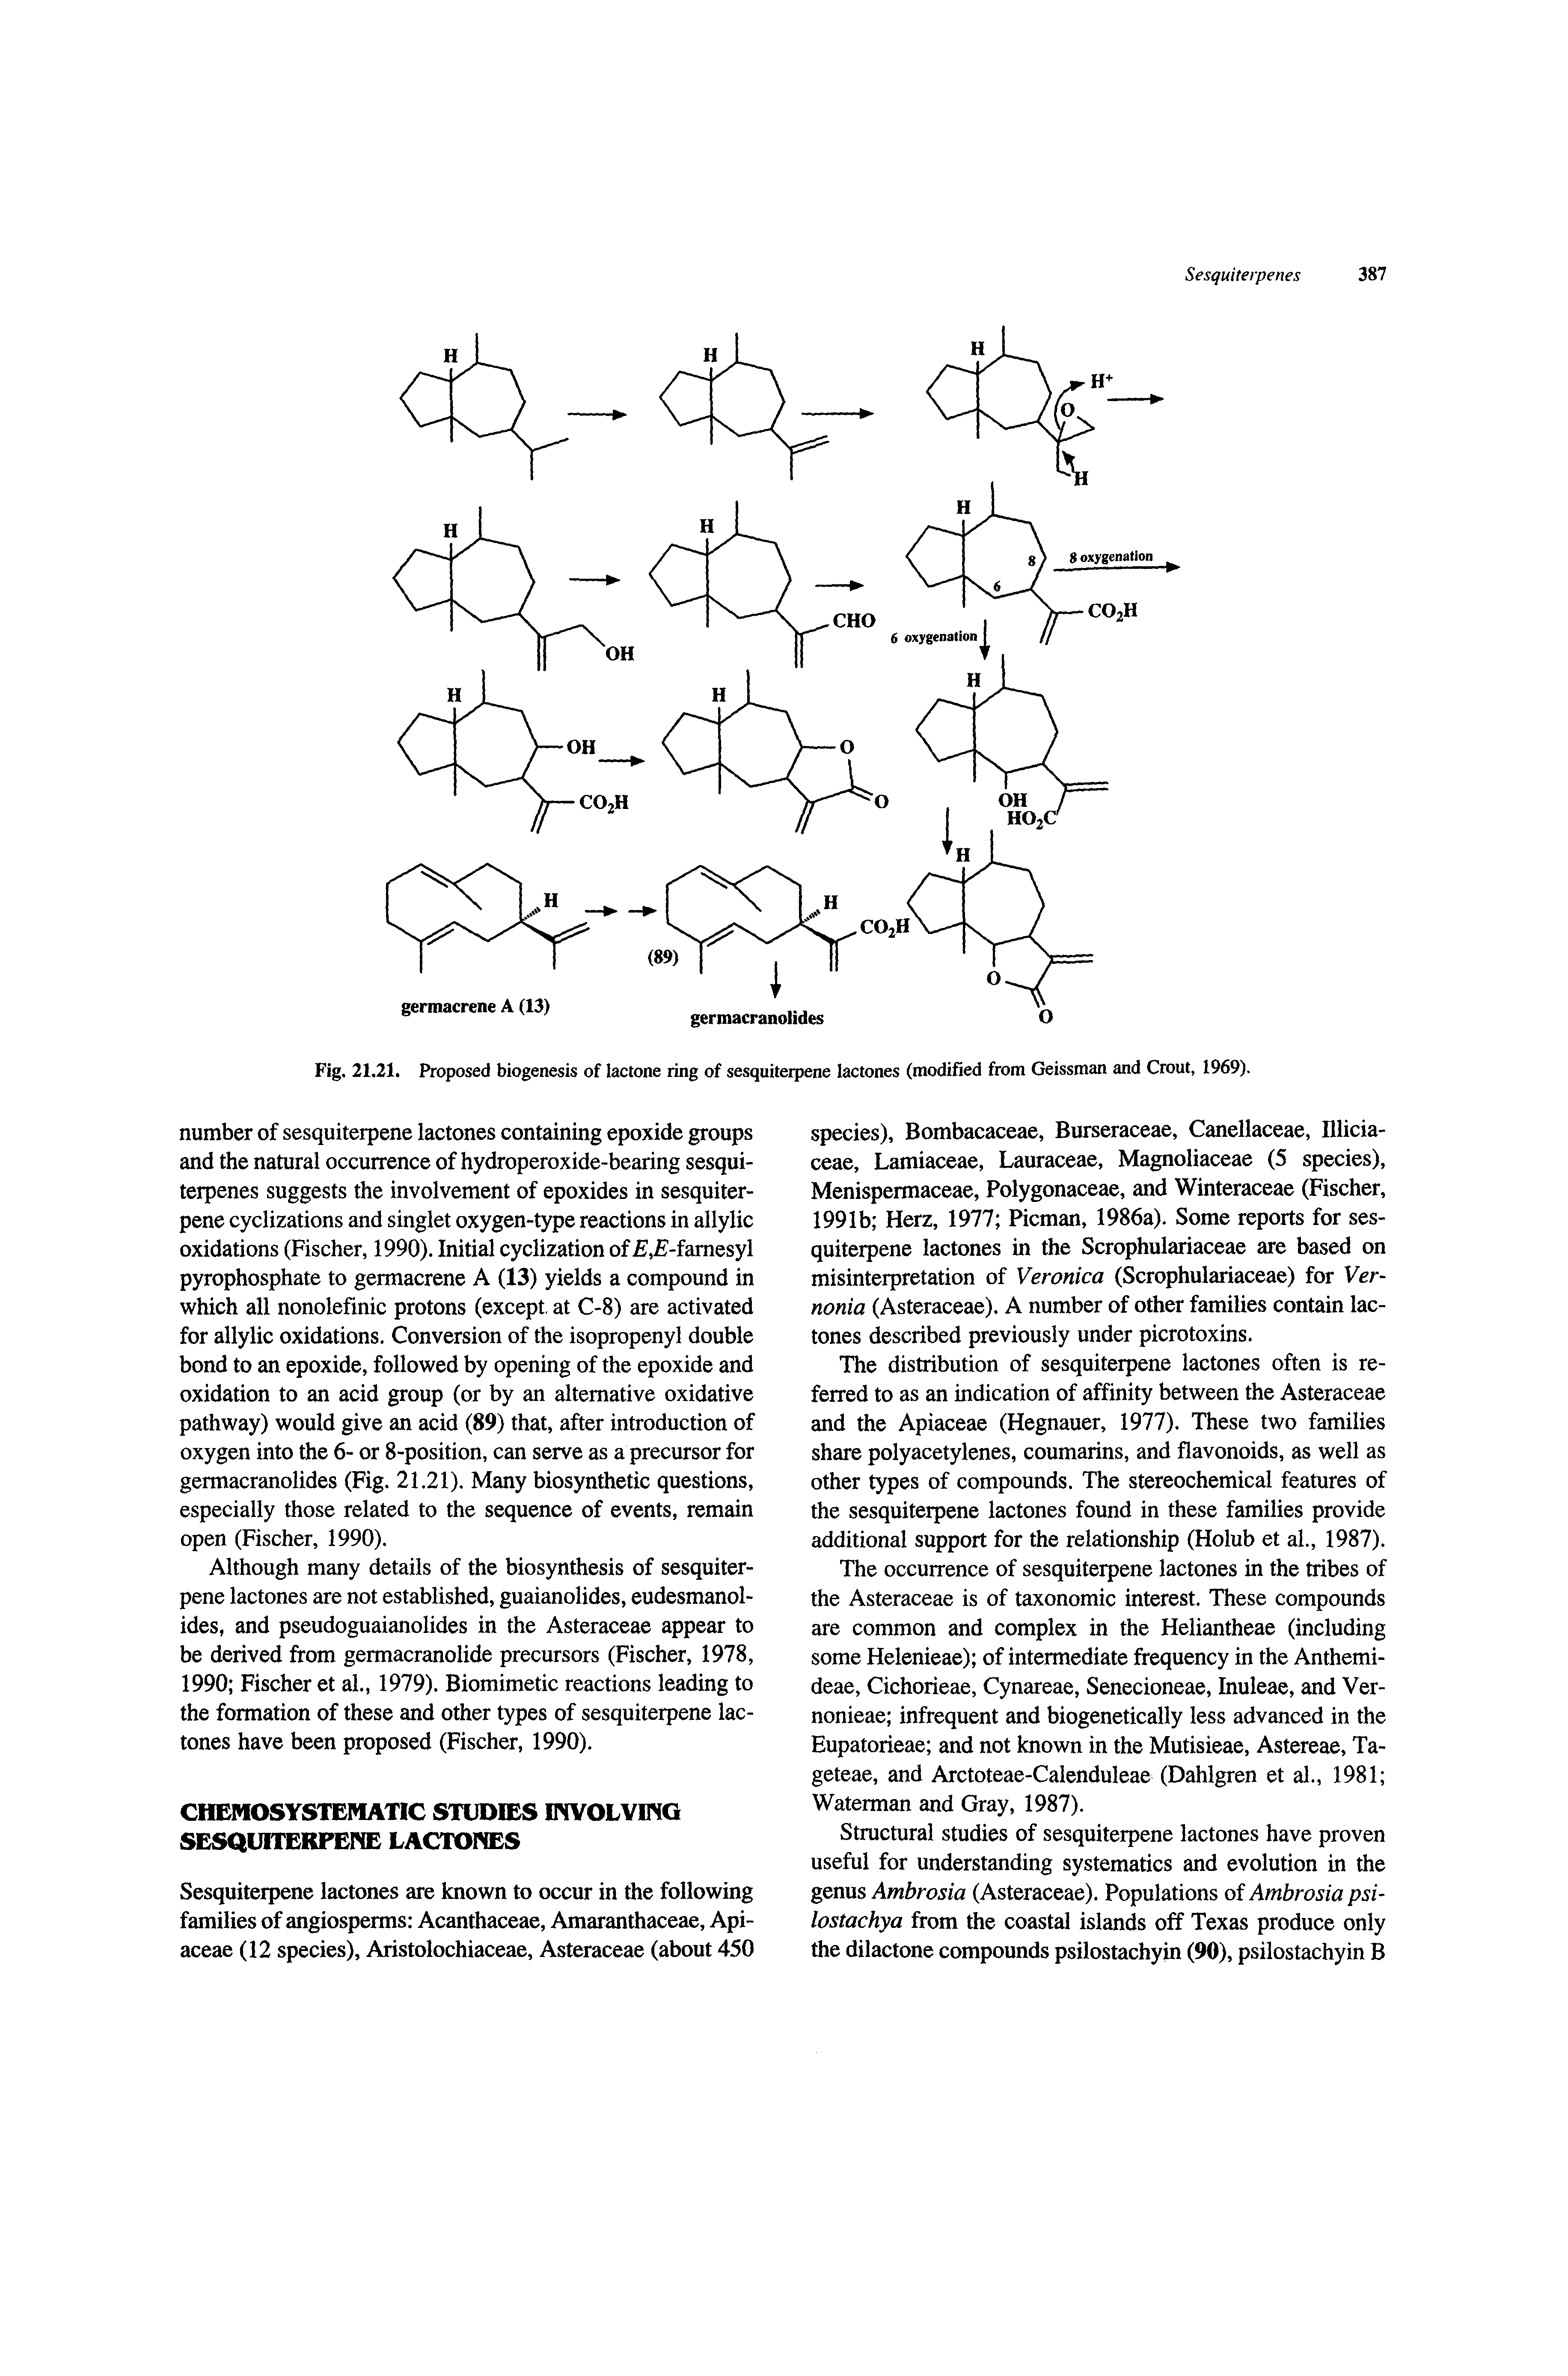 Fig. 21.21. Proposed biogenesis of lactone ring of sesquiterpene lactones (modified from Geissman and Grout, 1969).